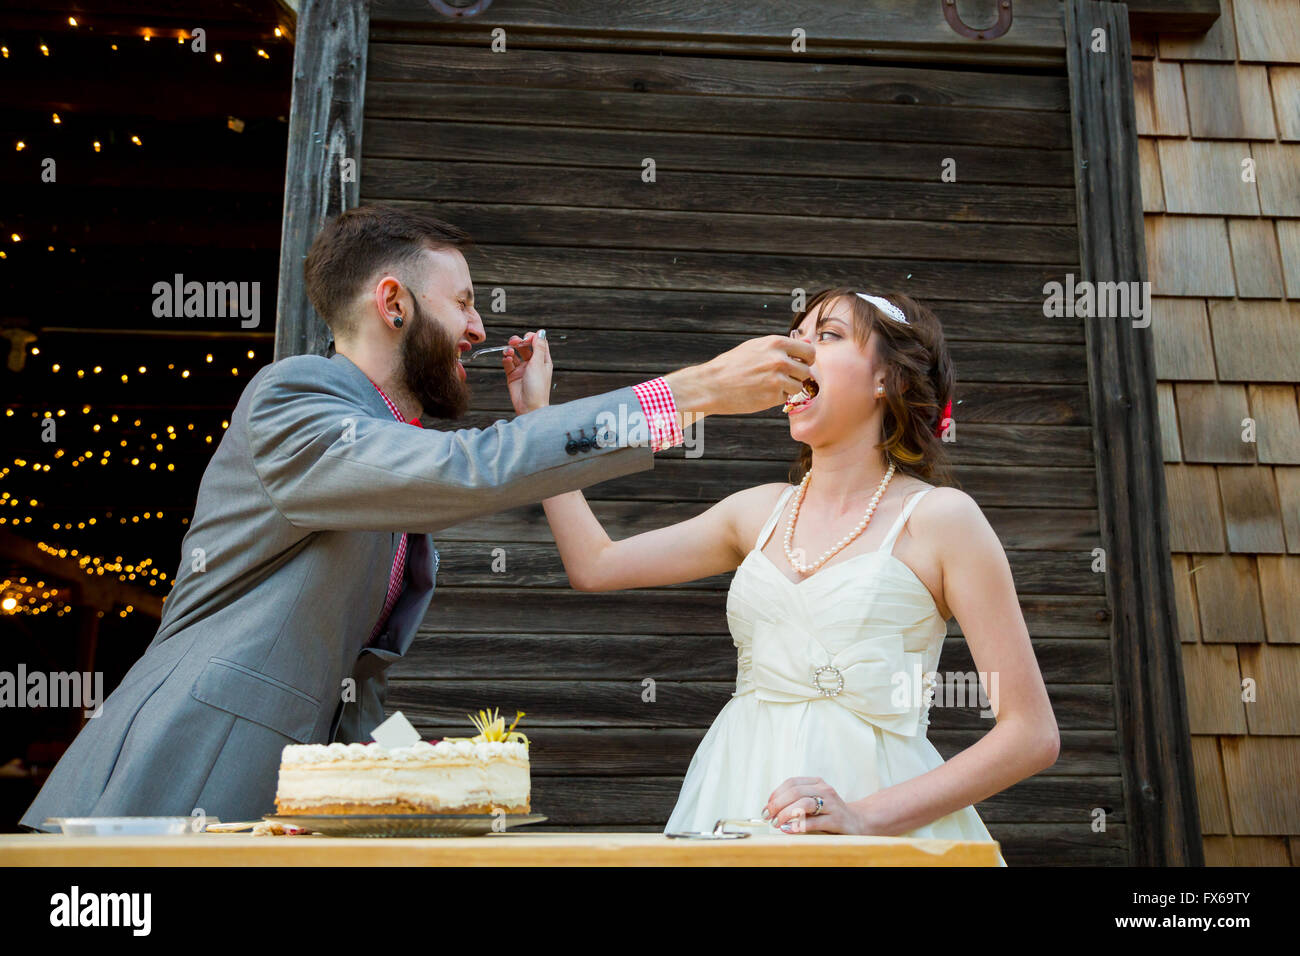 Bride and groom cut the cake and feed each other on their wedding day at the reception. Stock Photo